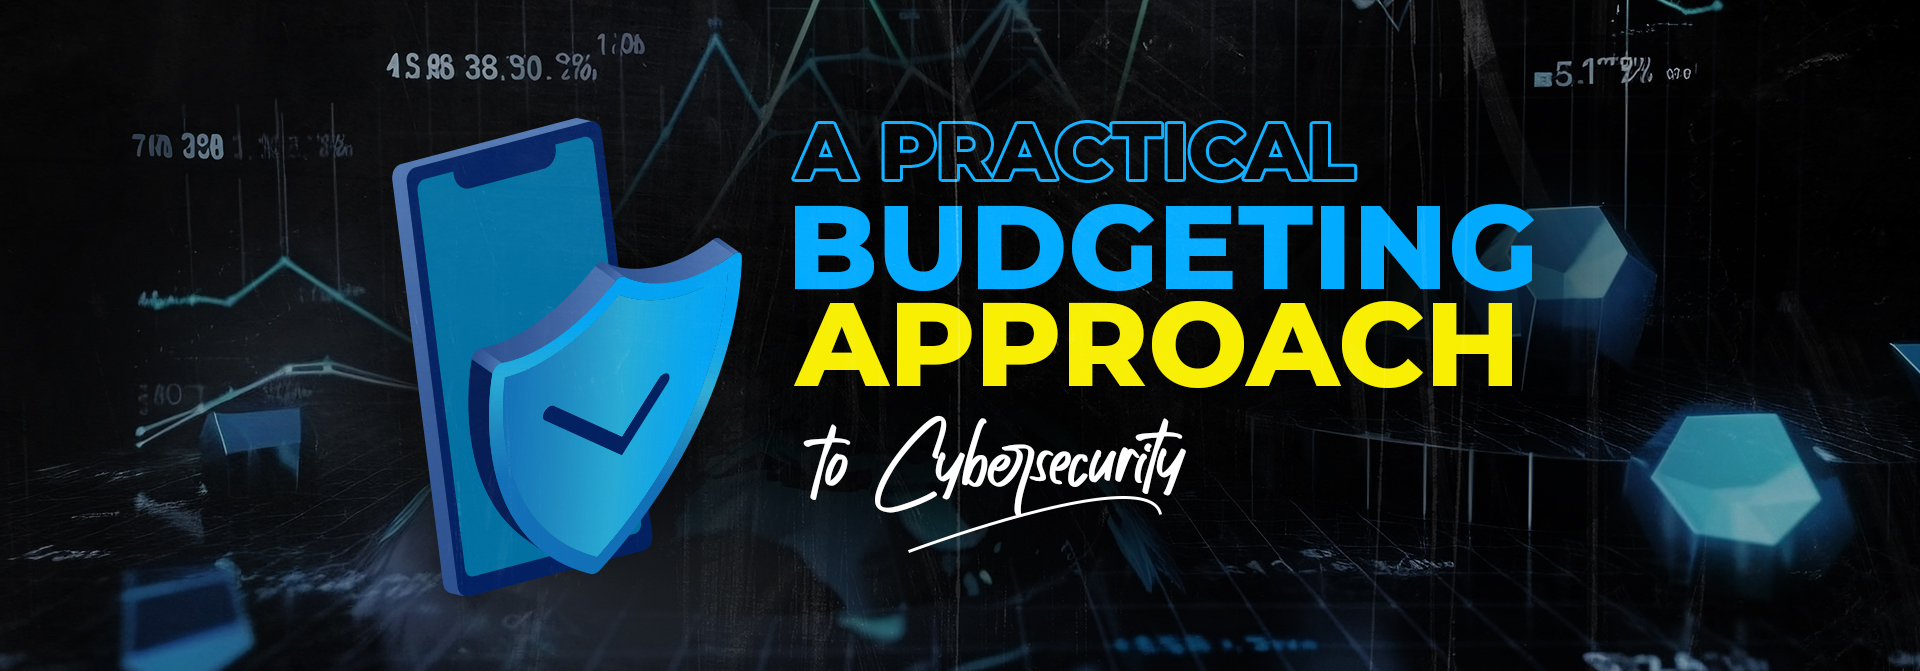 PAC-blog_A-Practical-Budgeting-Approach-to-Cybersecurity_main-banner